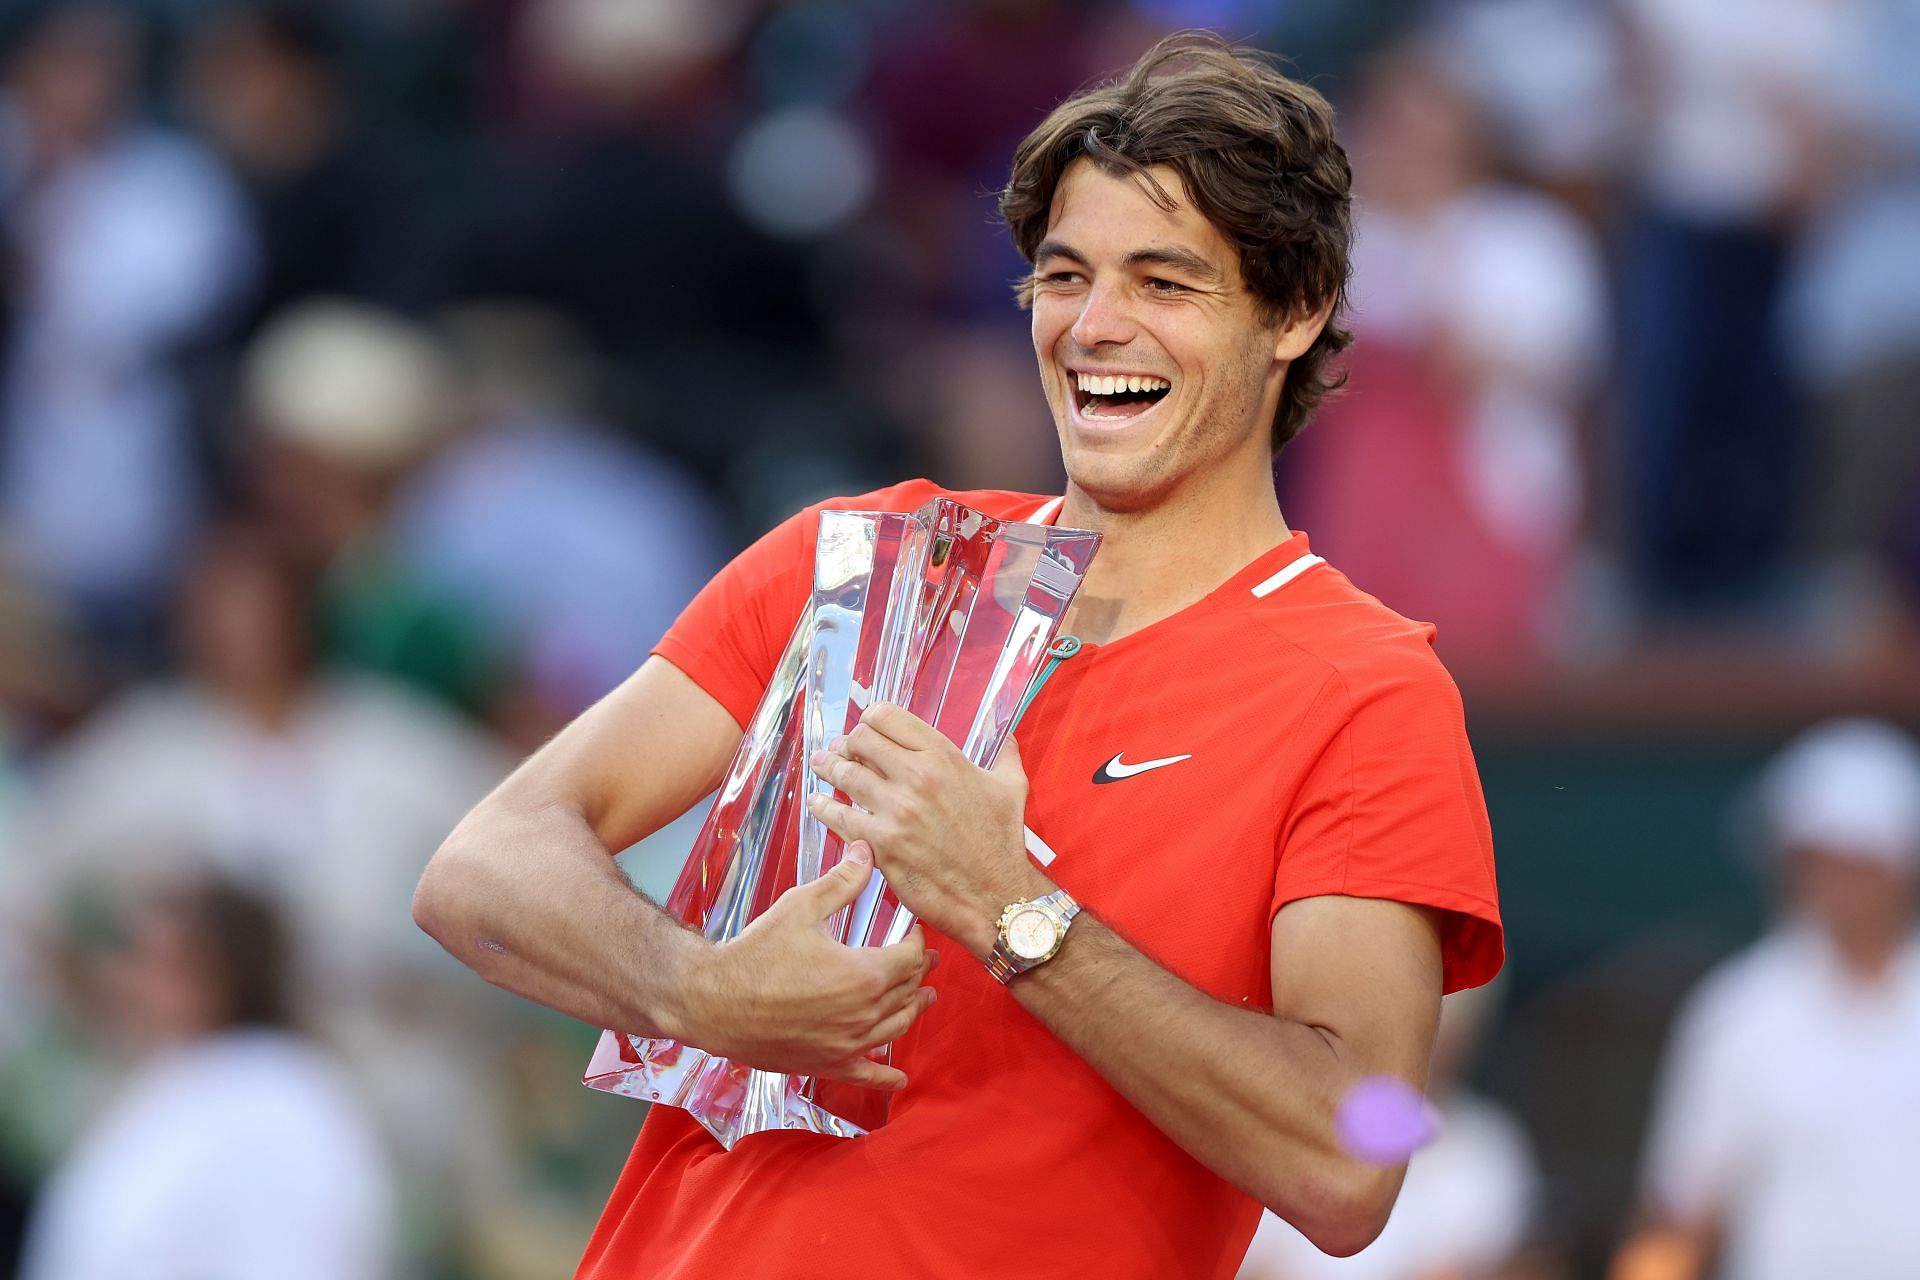 Taylor Fritz won the 2022 Indian Wells Masters